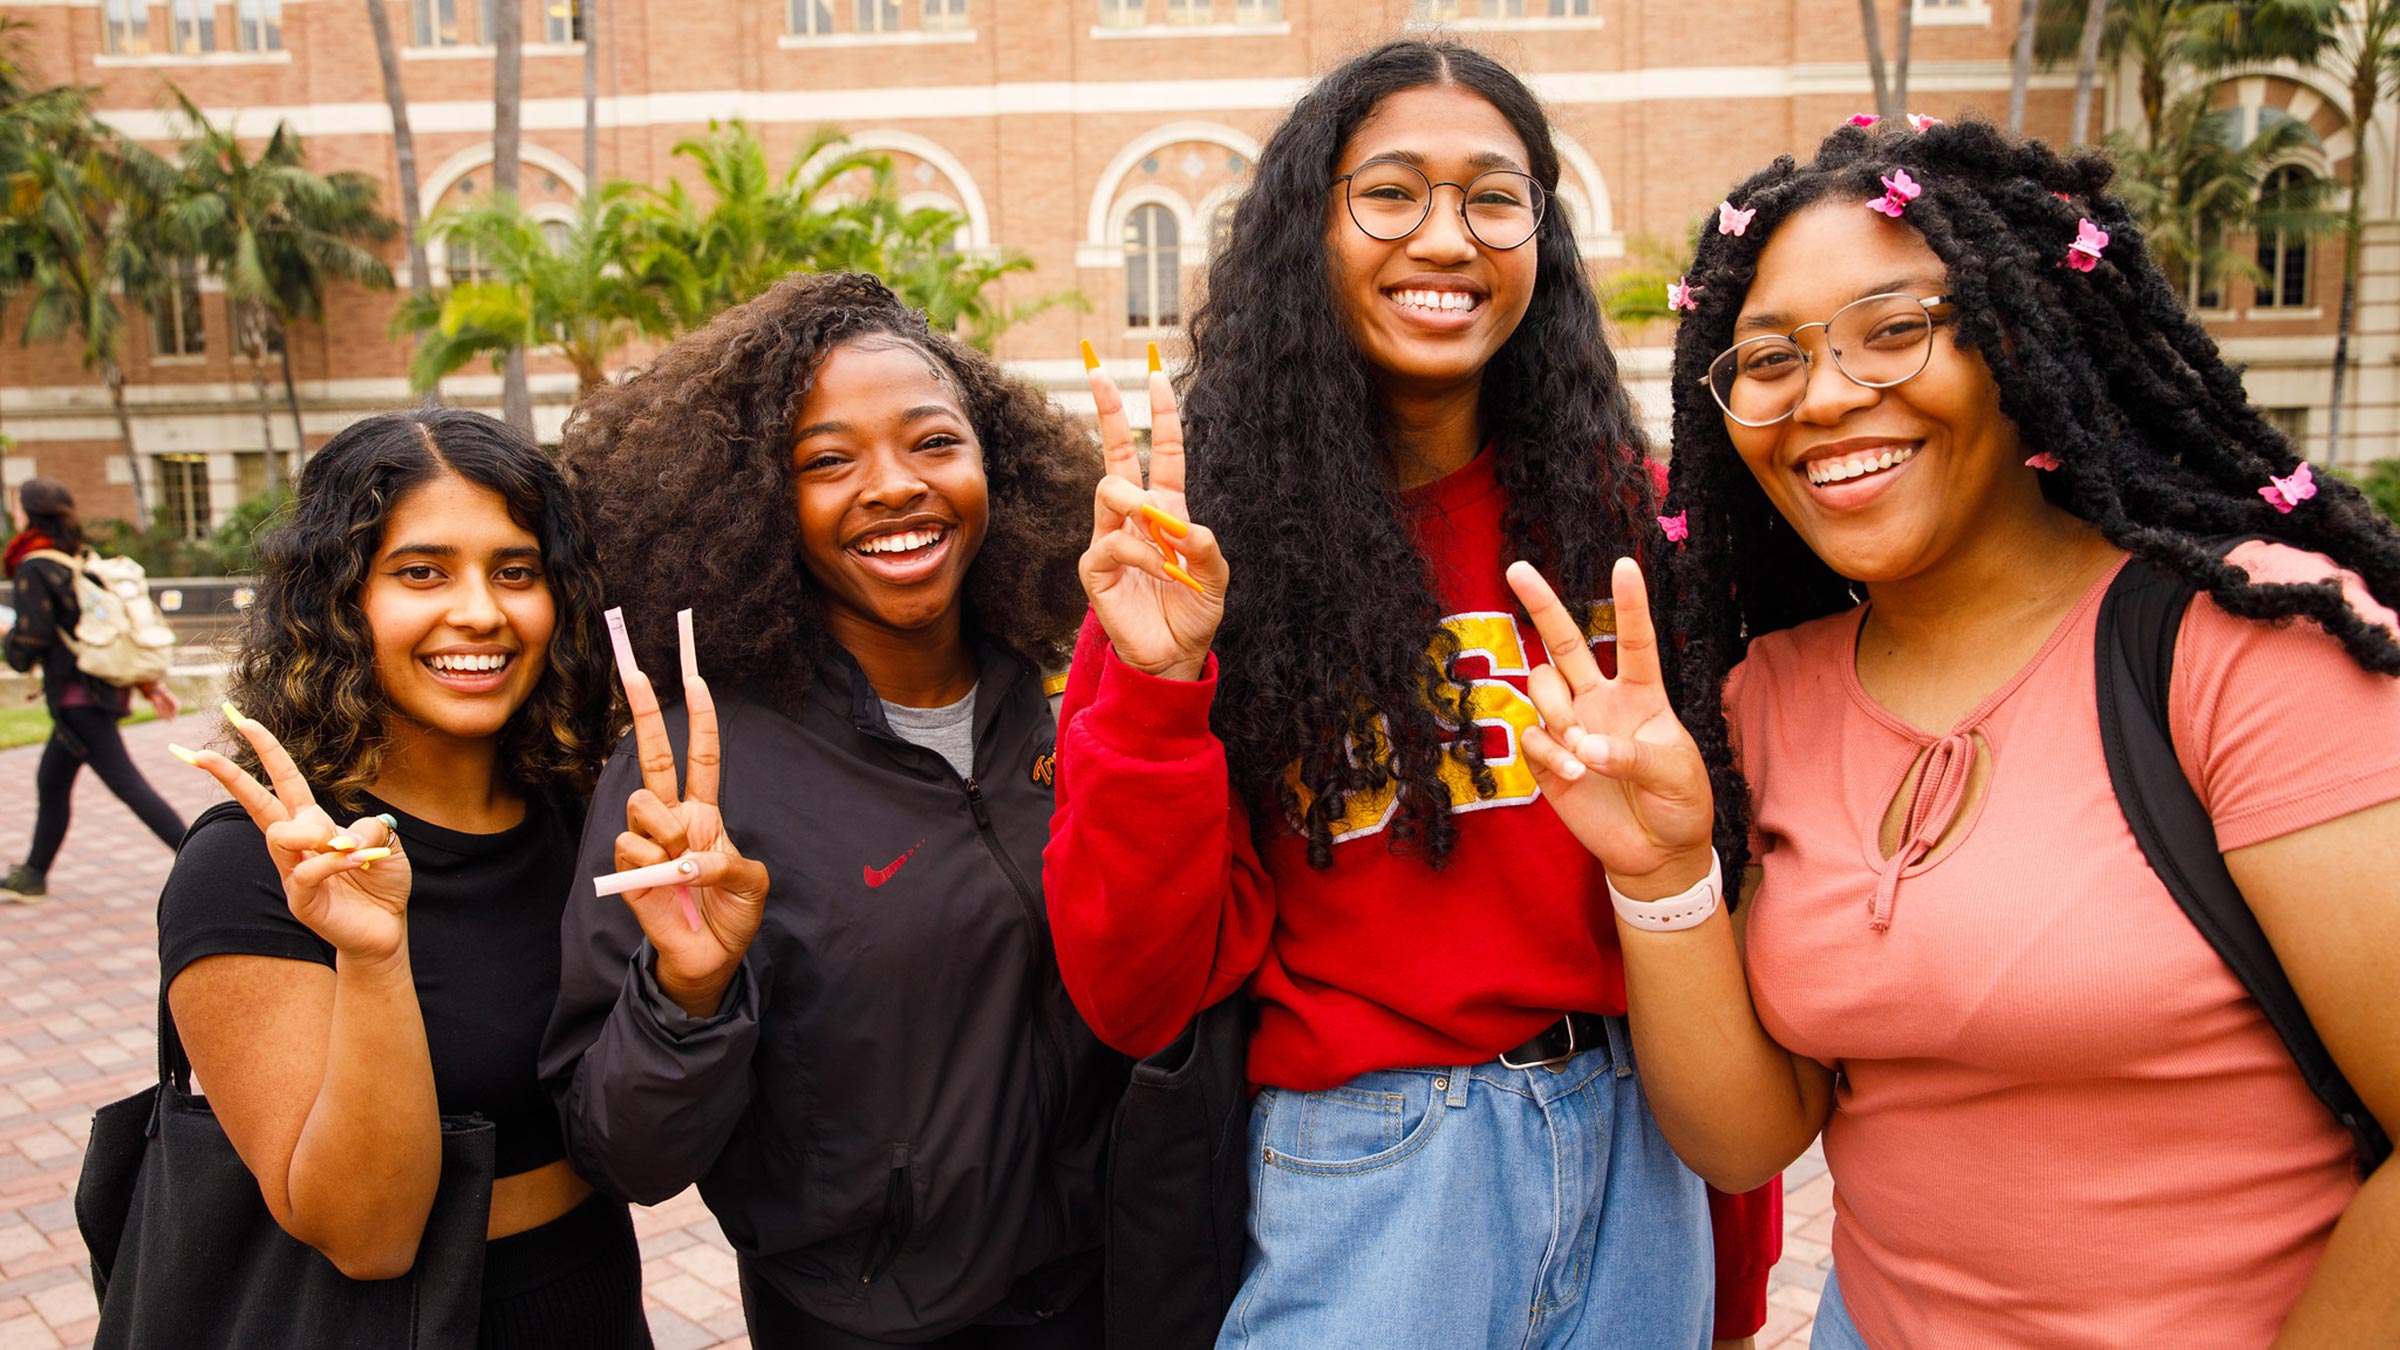 Four students holding up "Fight On" hand sign and smiling wearing USC branded merch.